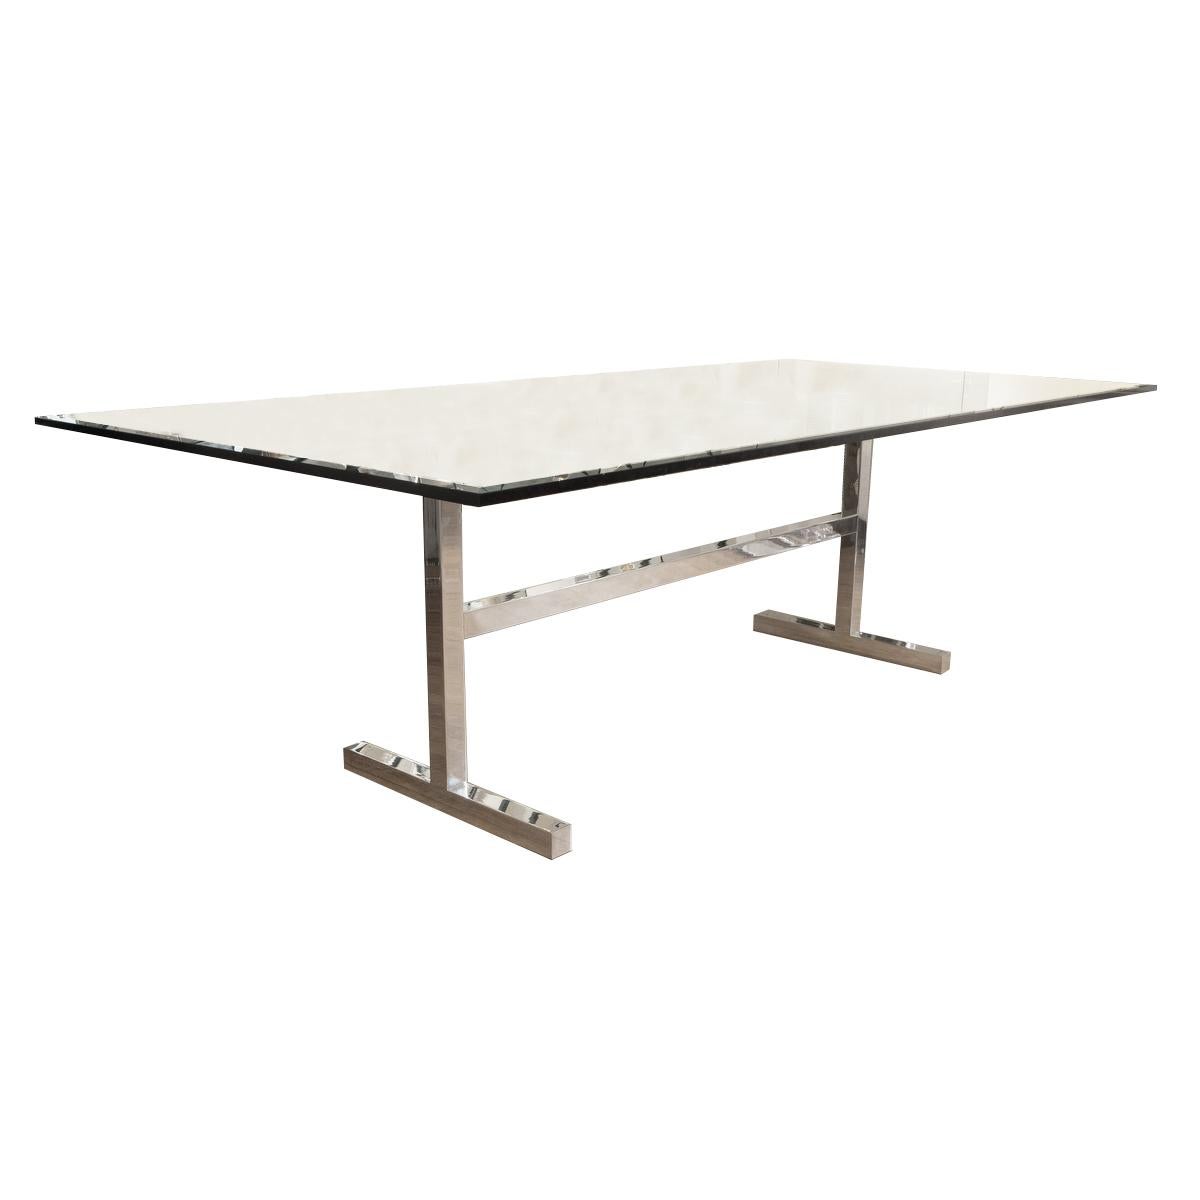 Rectangular glass and nickel base dining table For Sale